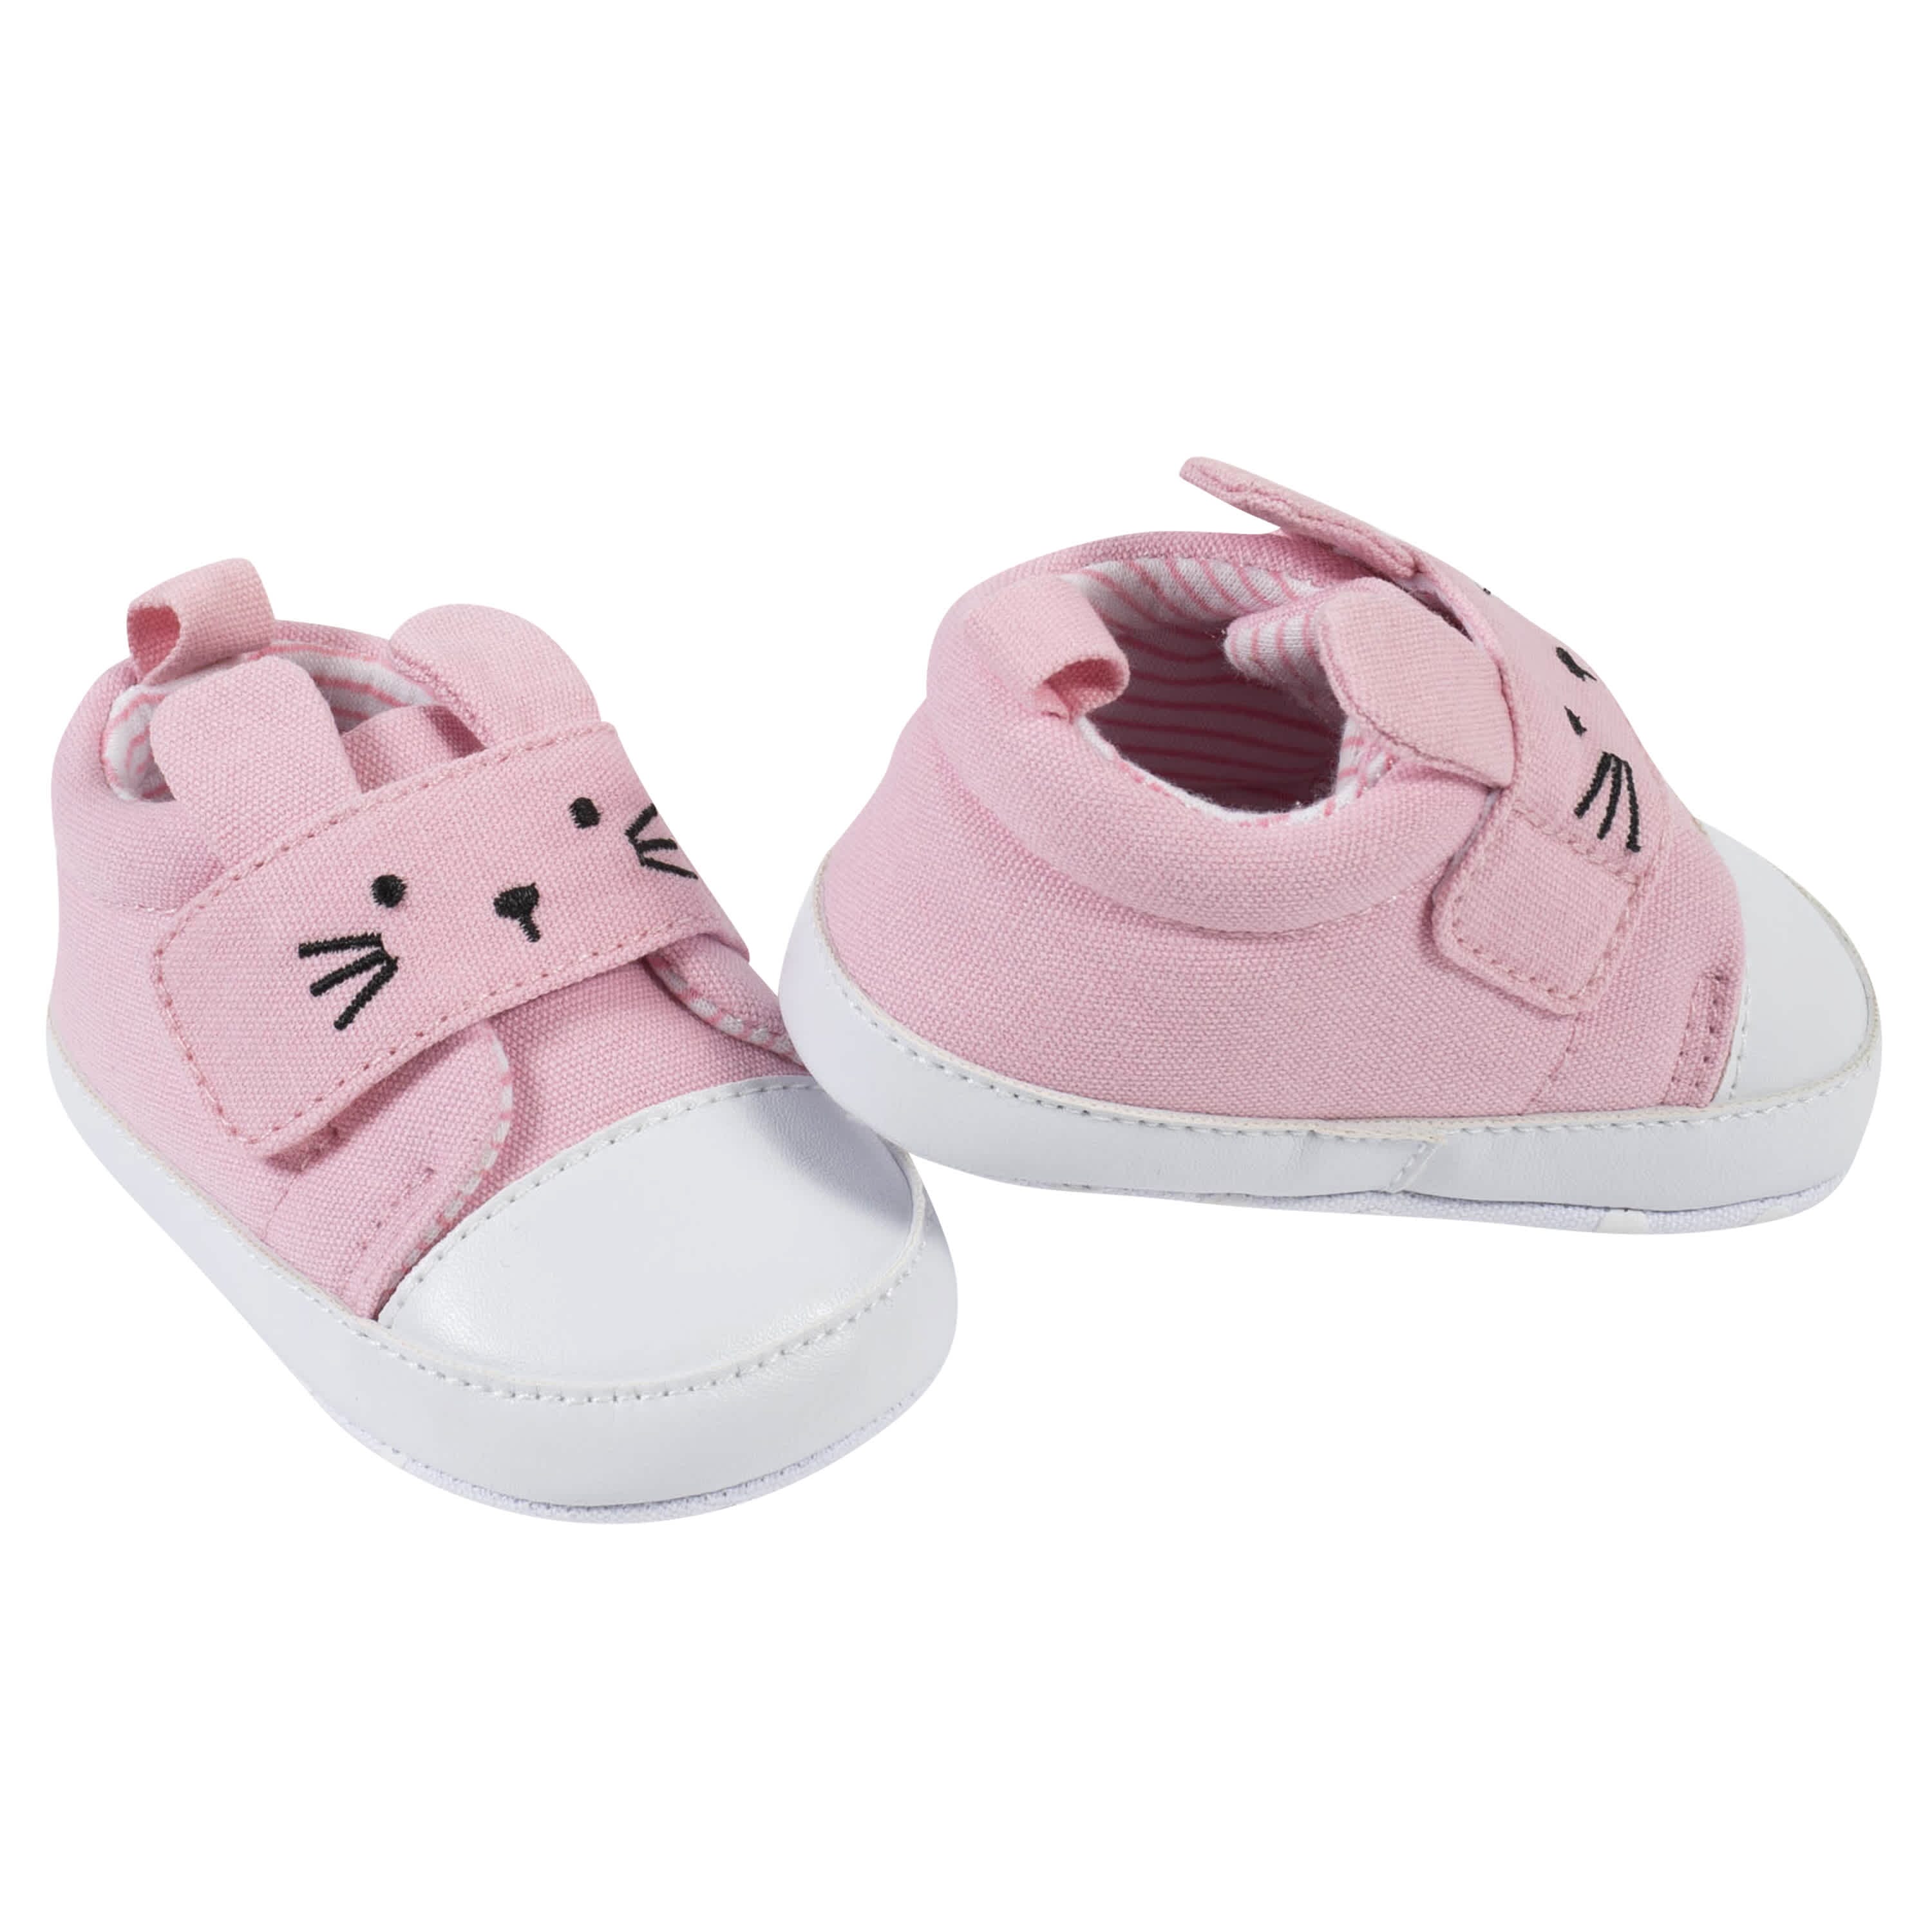 New Baby Shoes Sneakers Soft Cotton Cute Star Print Baby Girl